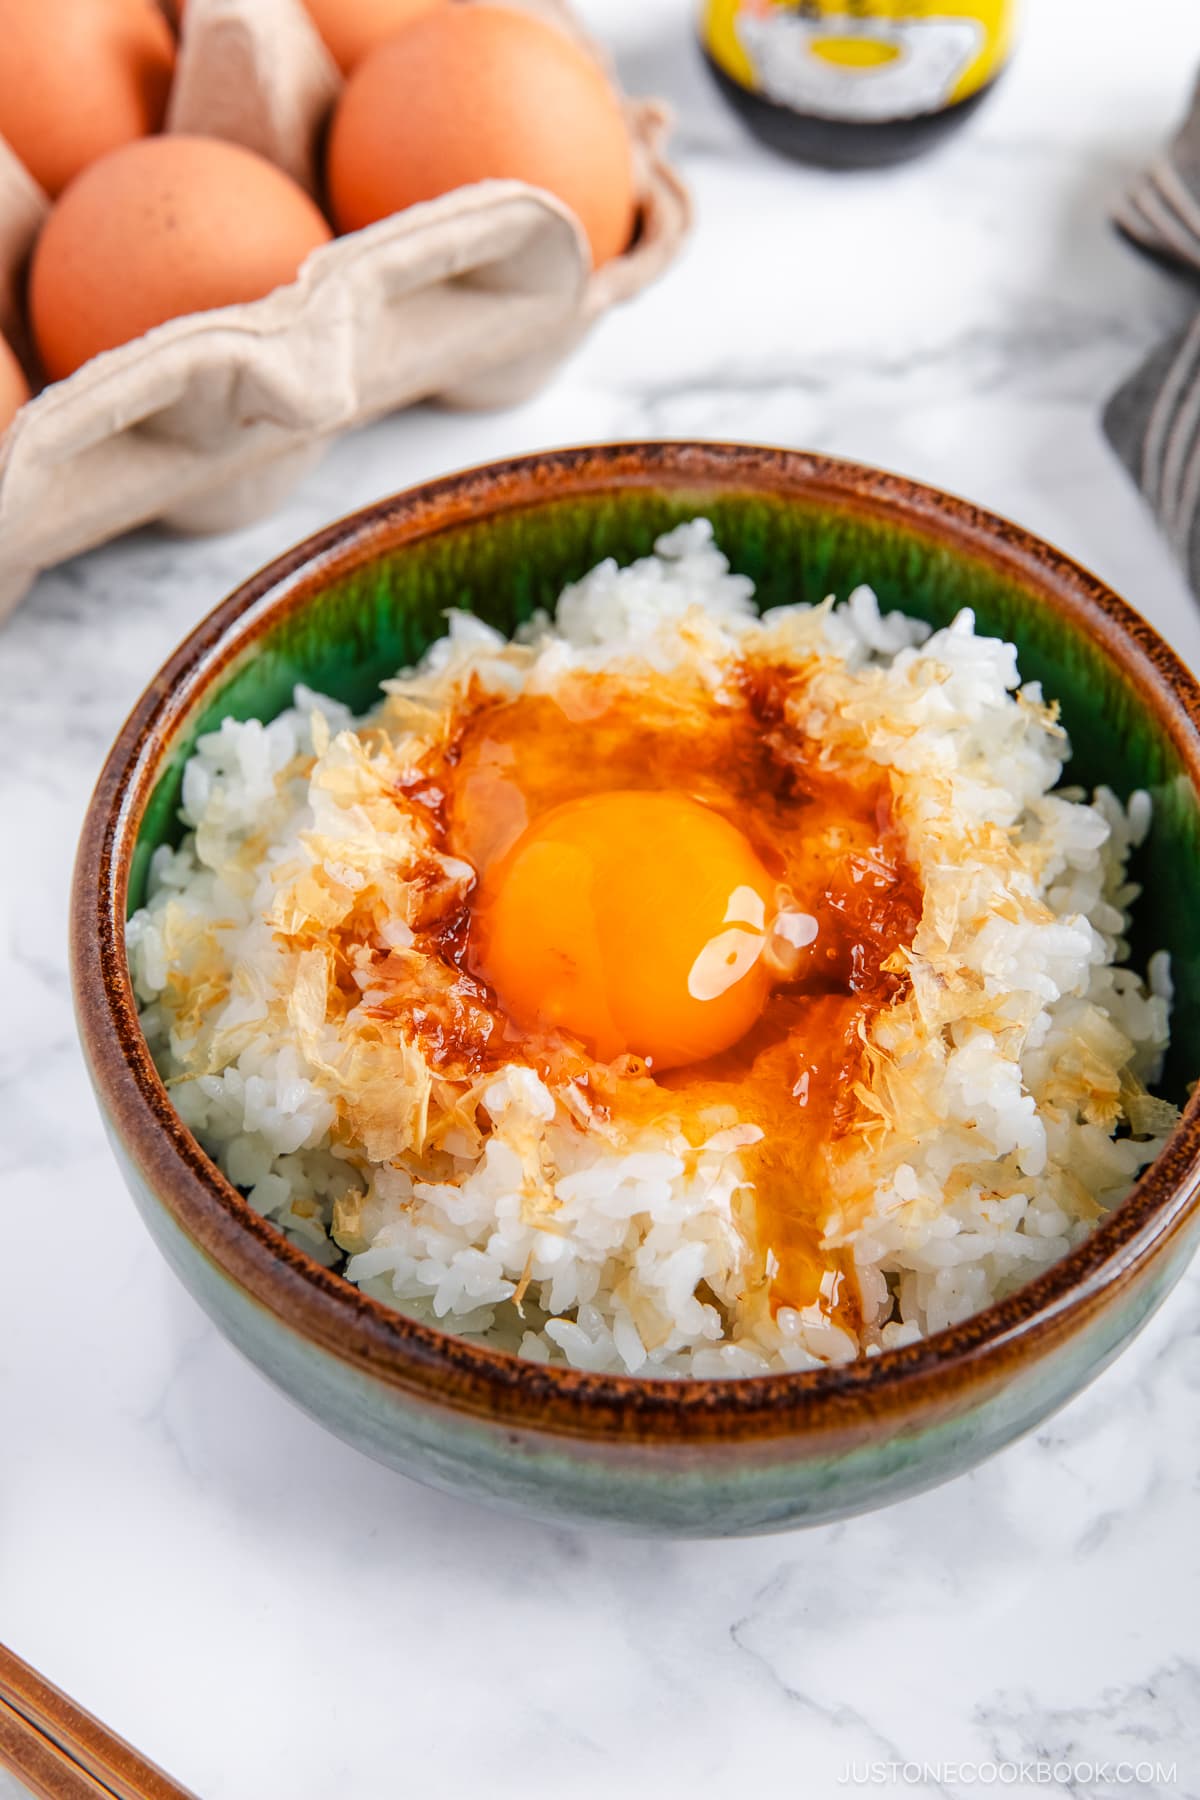 A bowl containing steamed rice, raw egg, sprinkled katsuobushi, and a drizzle of soy sauce.